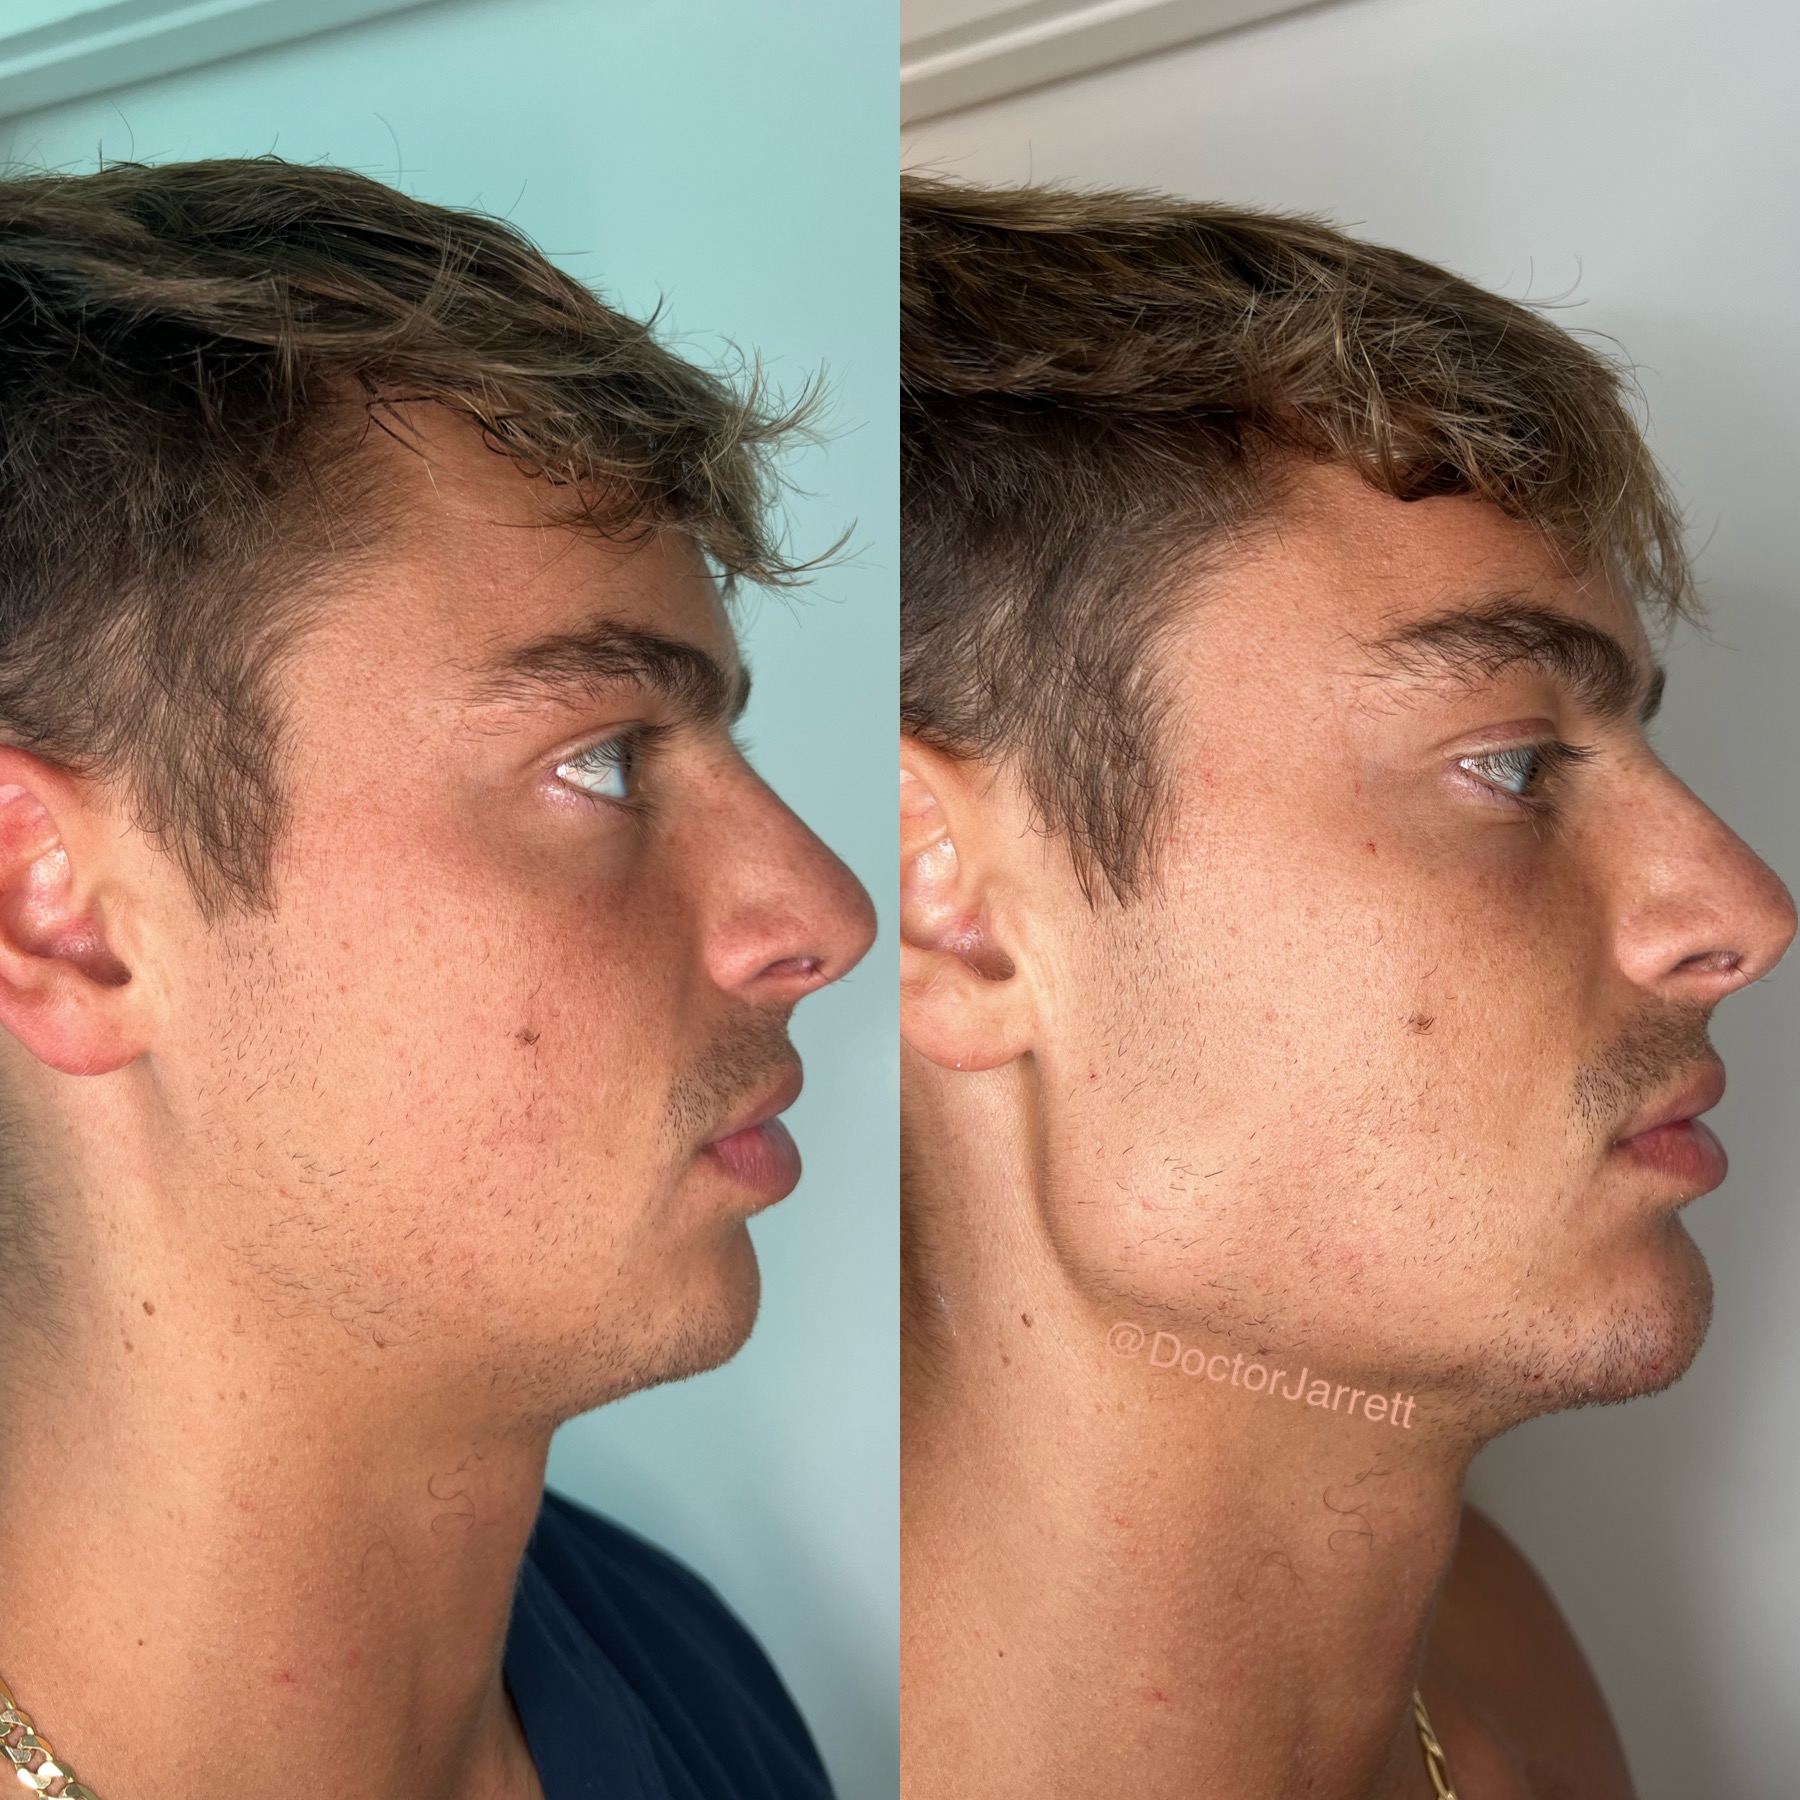 #jawline #fillers #jawlinecontour #aesthetics #miami #newyork #miami injector #medspa #americatop100injector #newyorkinjector #perfection #beauty #injections #fillers #injectables #doctor